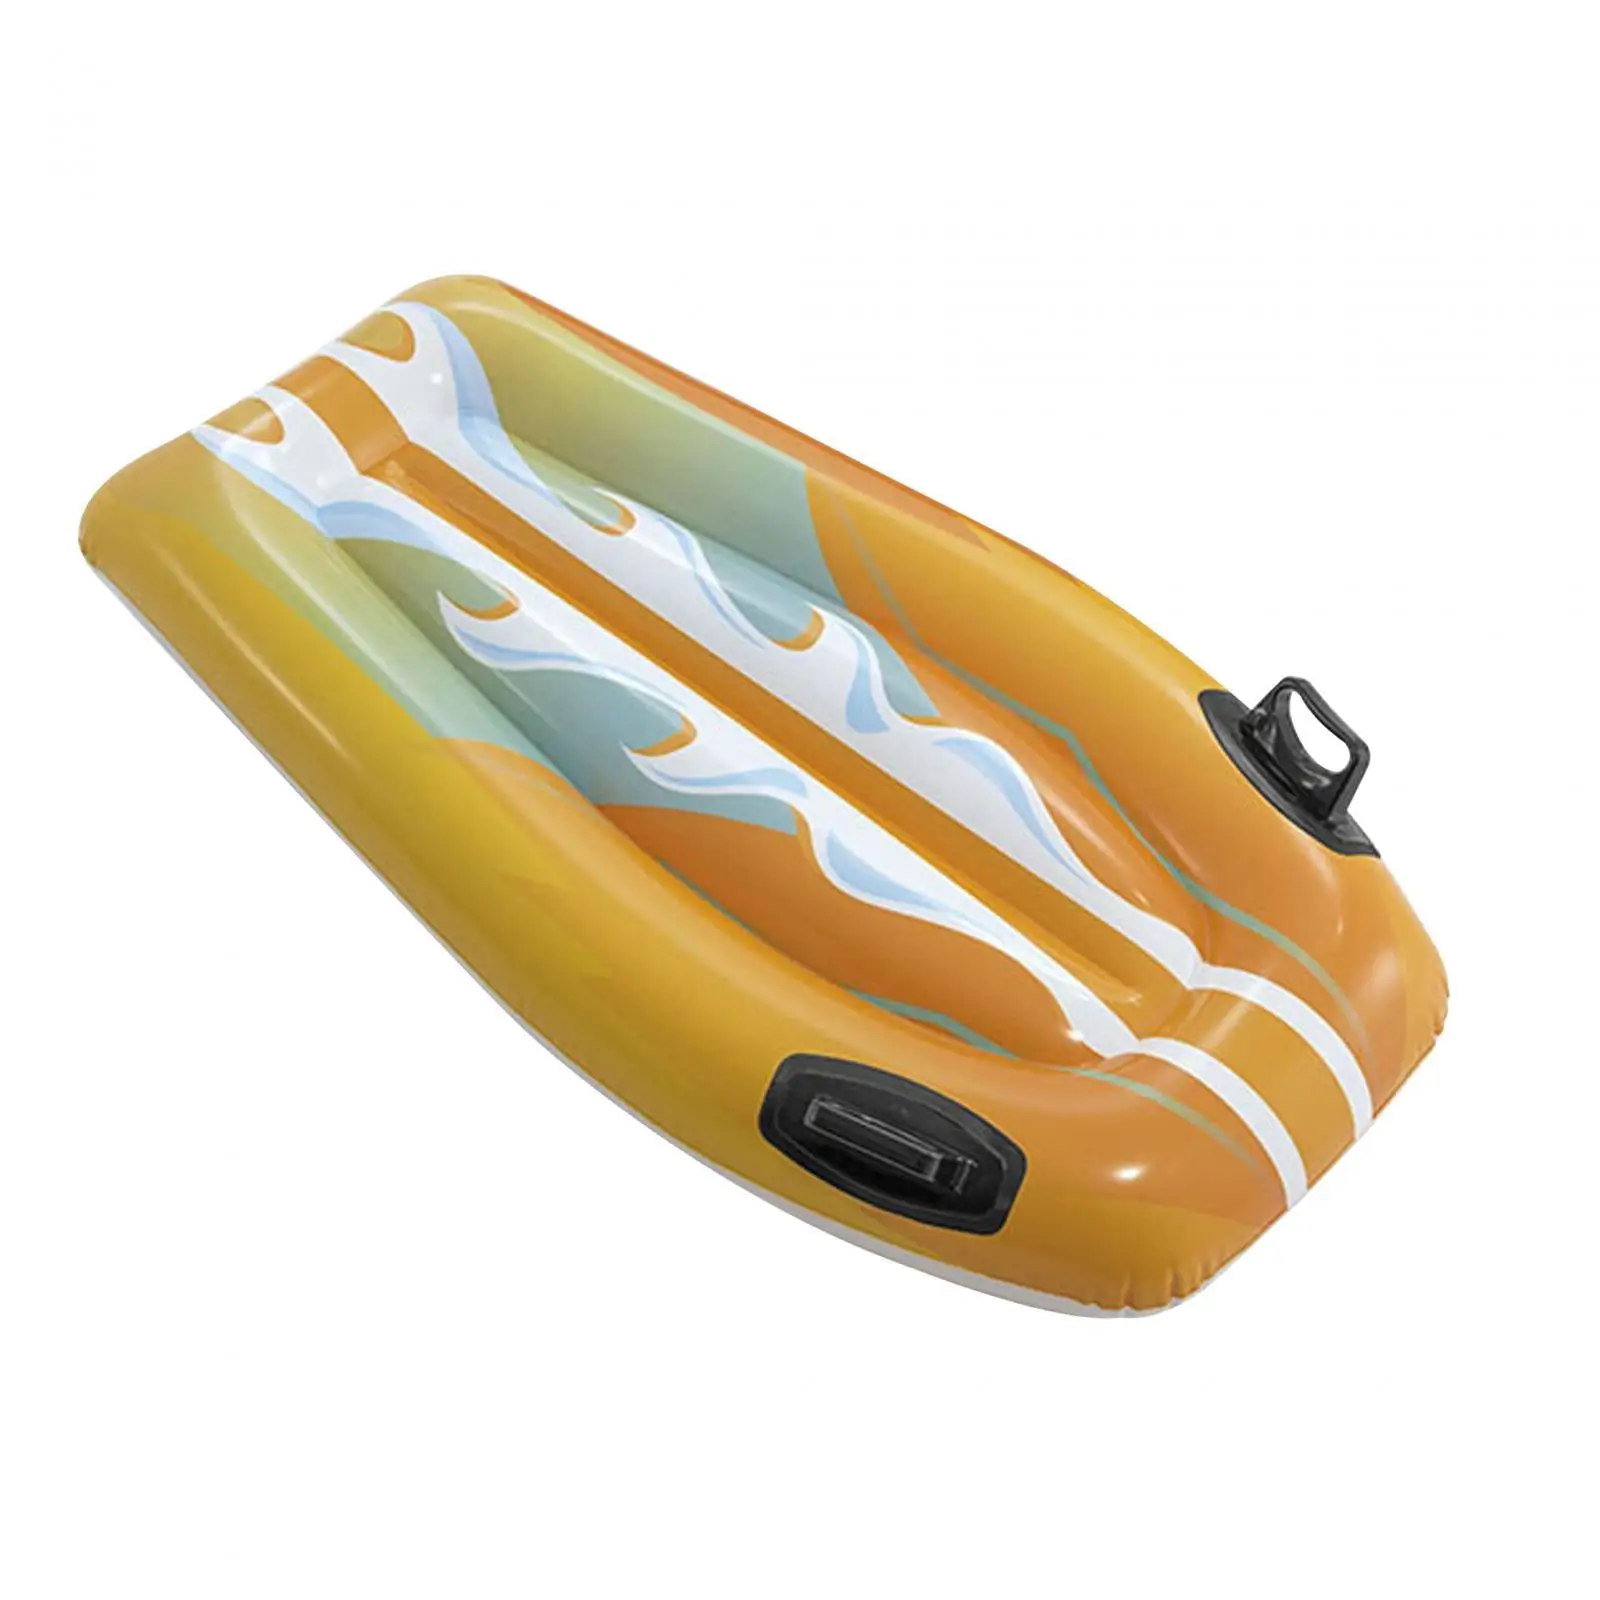 Inflatable Surfboard for Kids Portable Float Board...